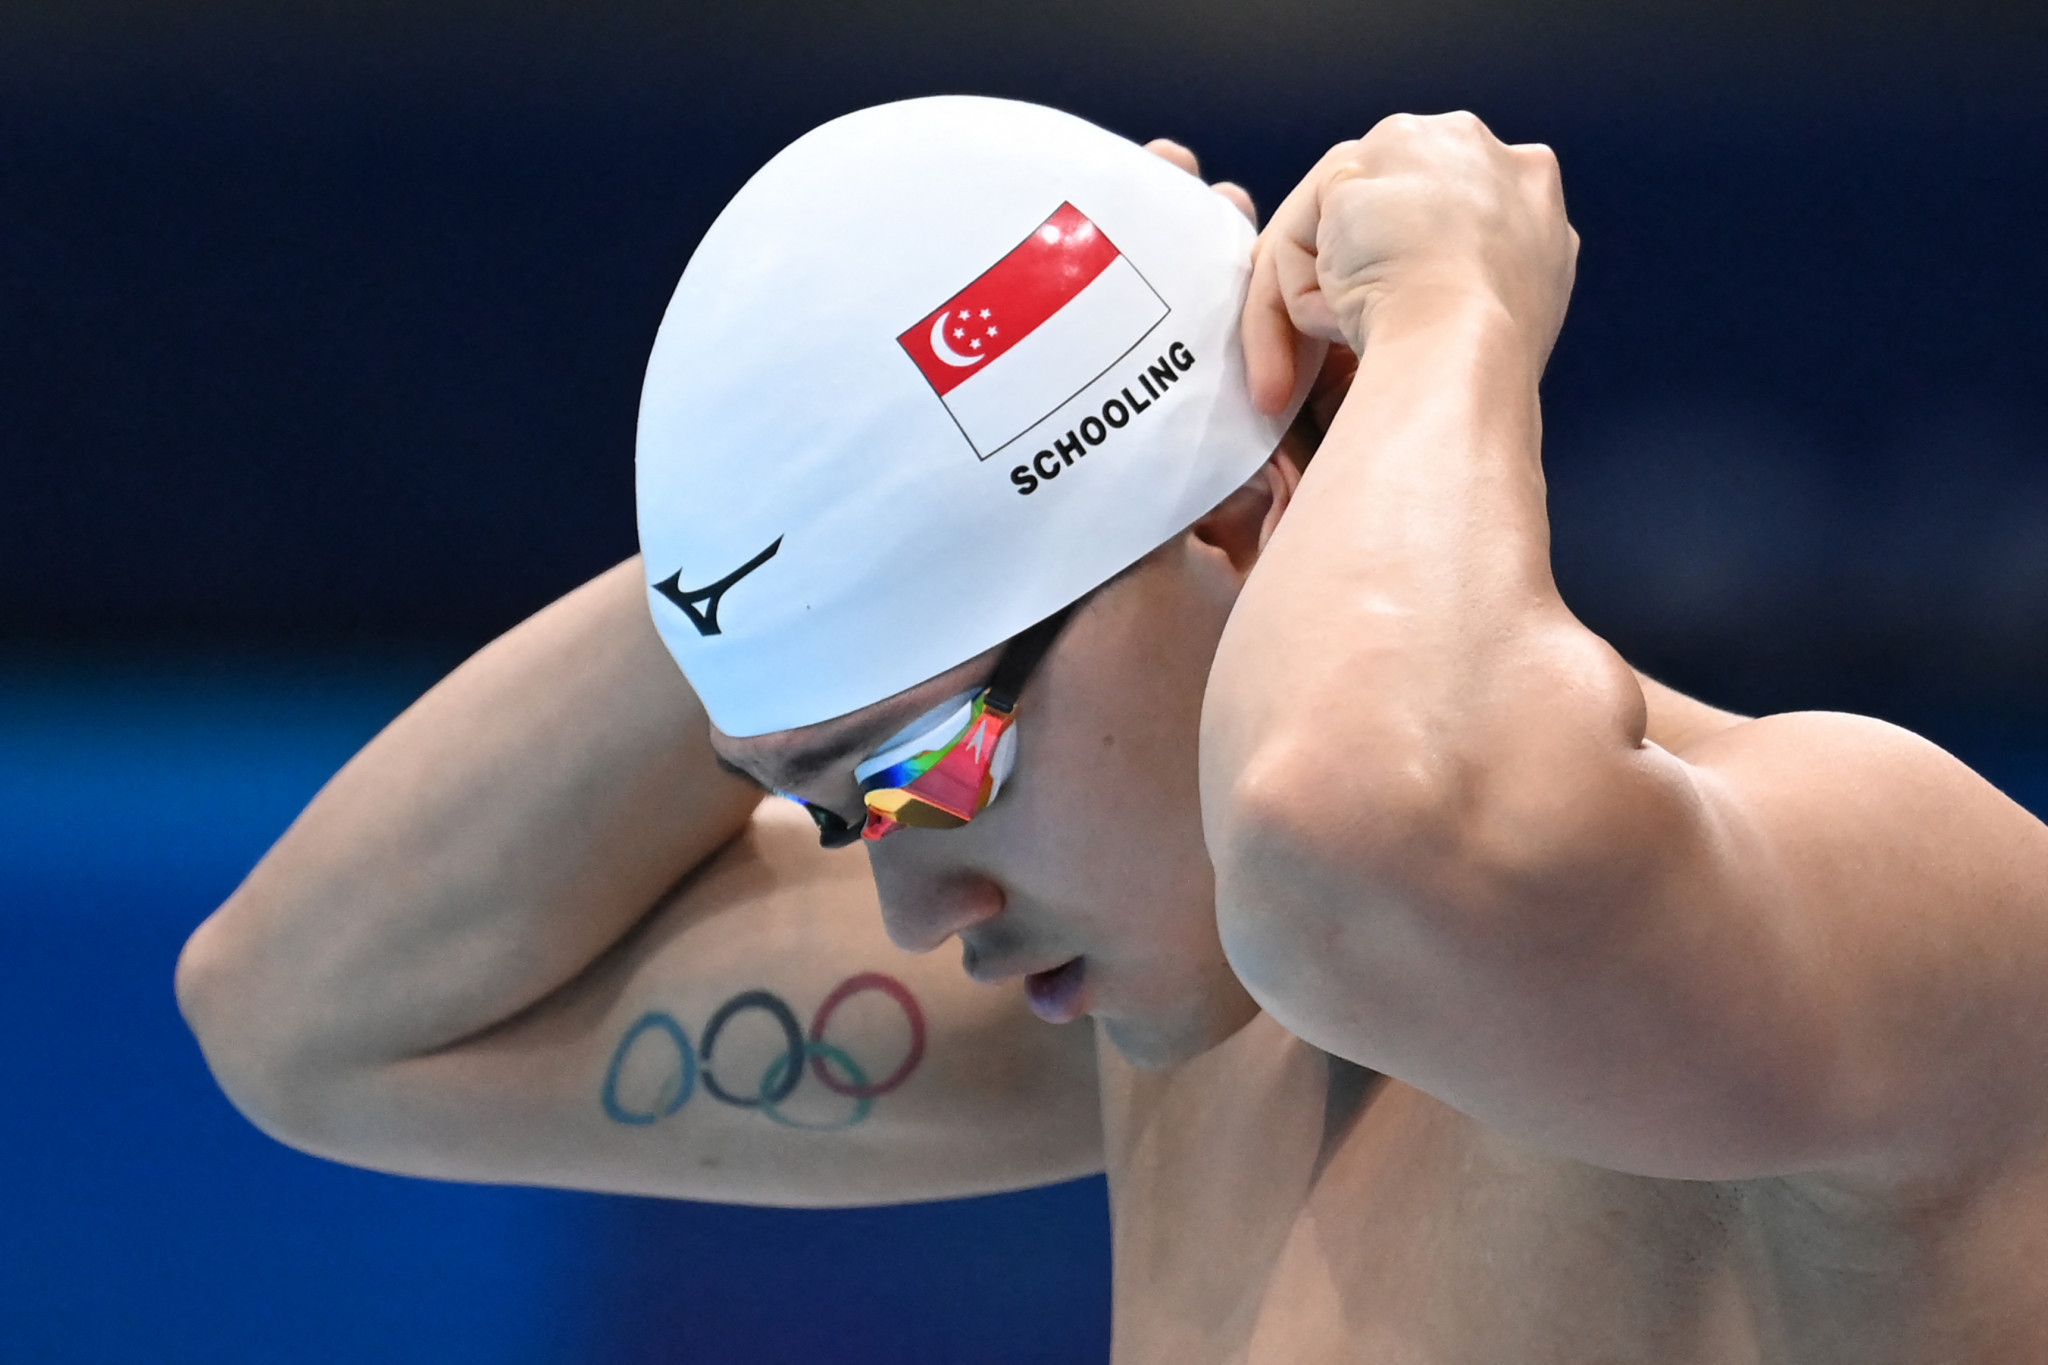 Joseph Schooling plans to skip the Birmingham 2022 Commonwealth Games ©Getty Images